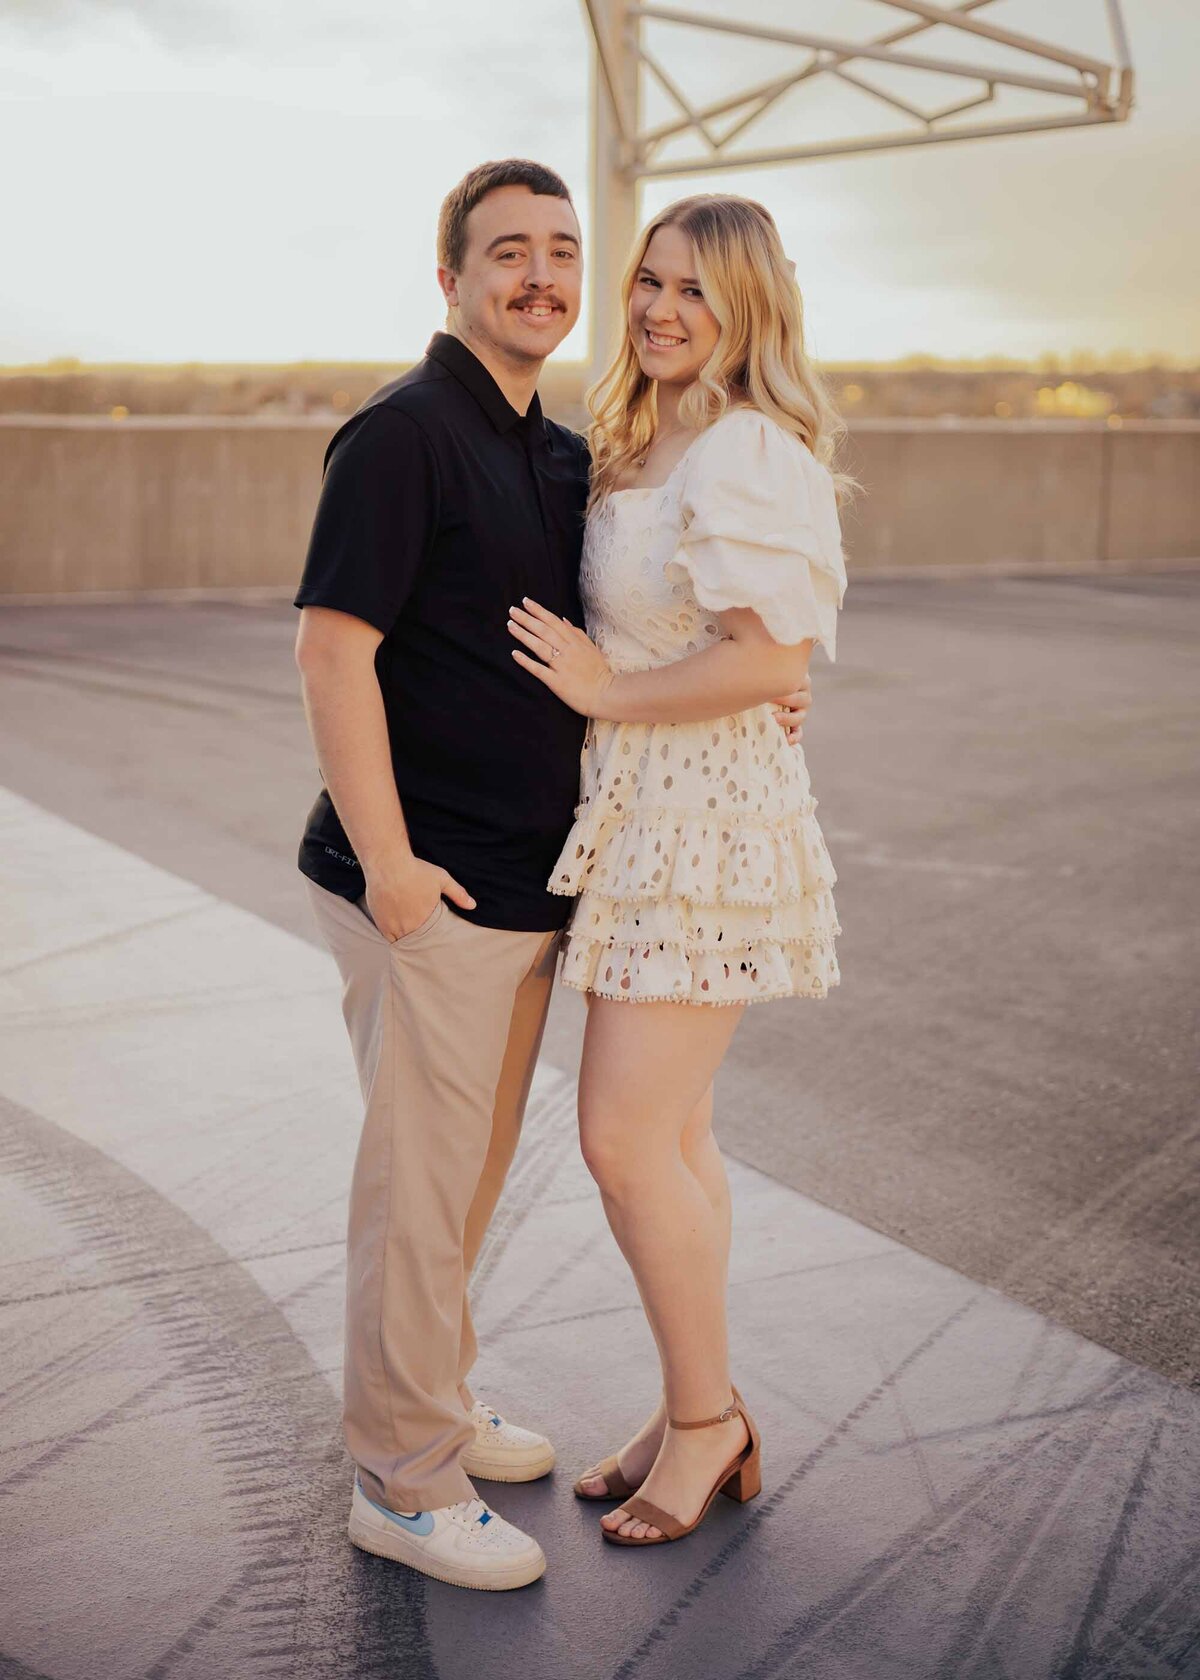 Maddie Rae Photography couple on the top of a parking garage standing side by side smiling at the camera.